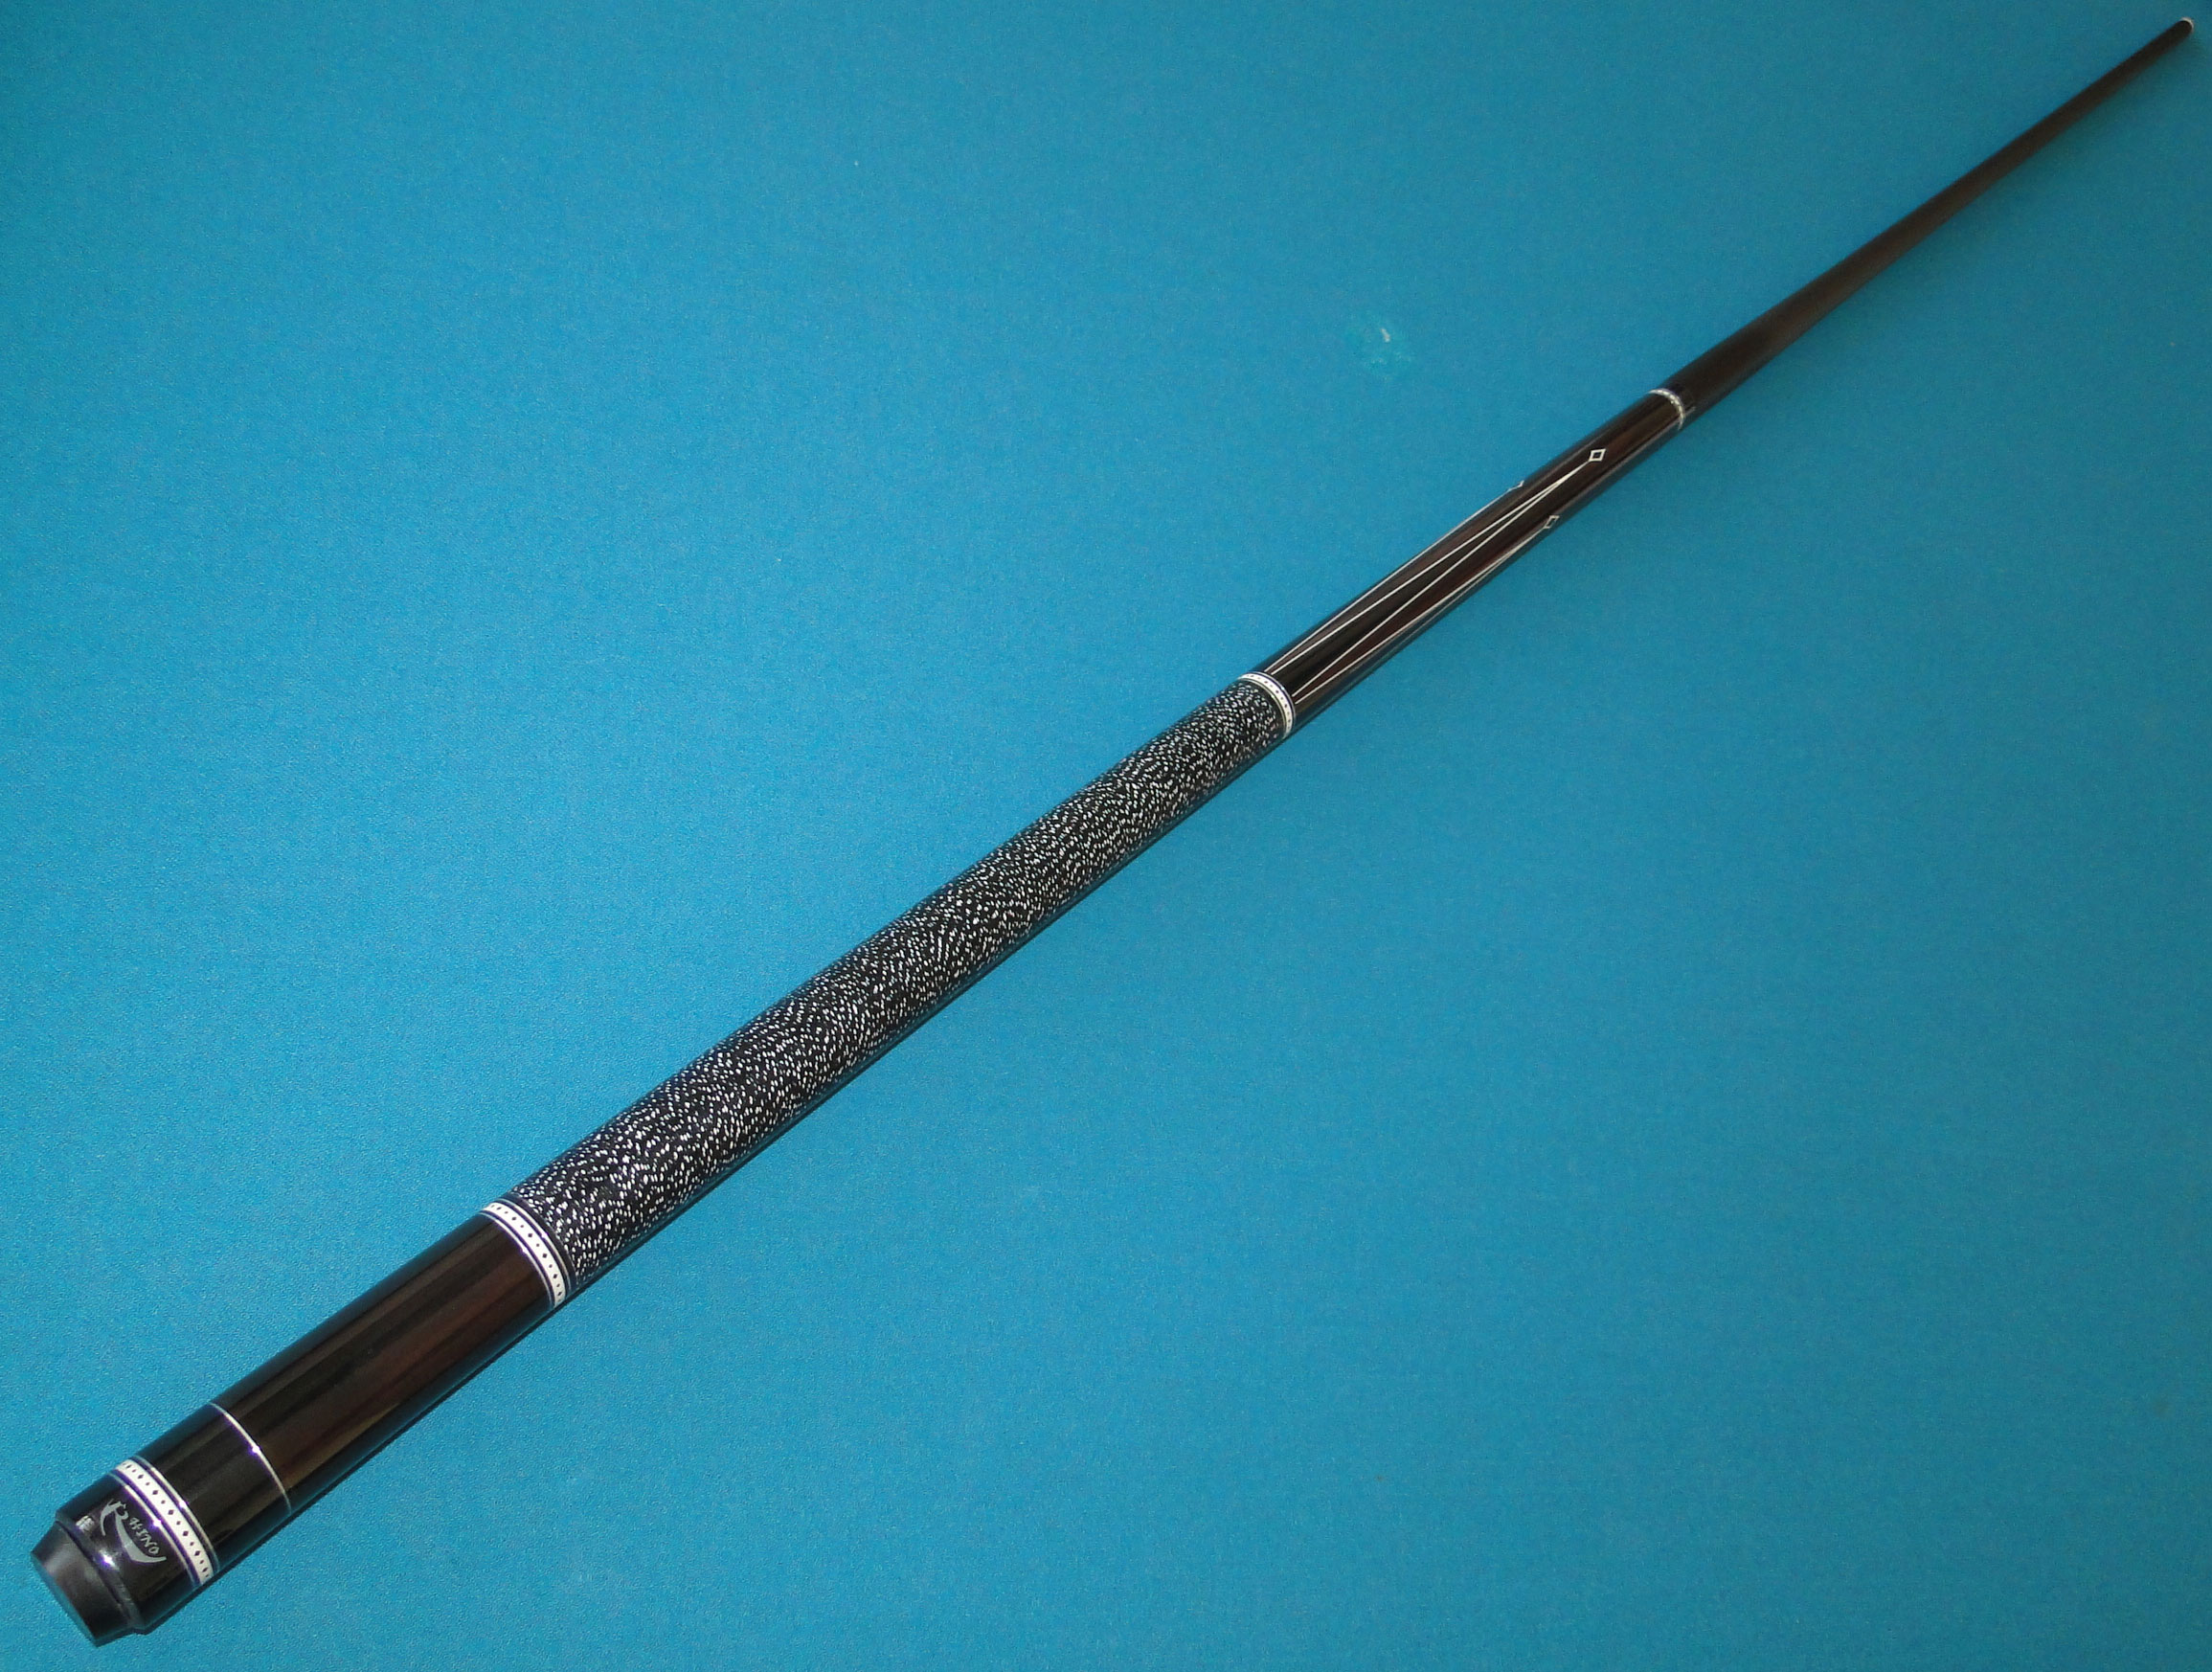 Mezz and Exceed cues with Ignite shaft